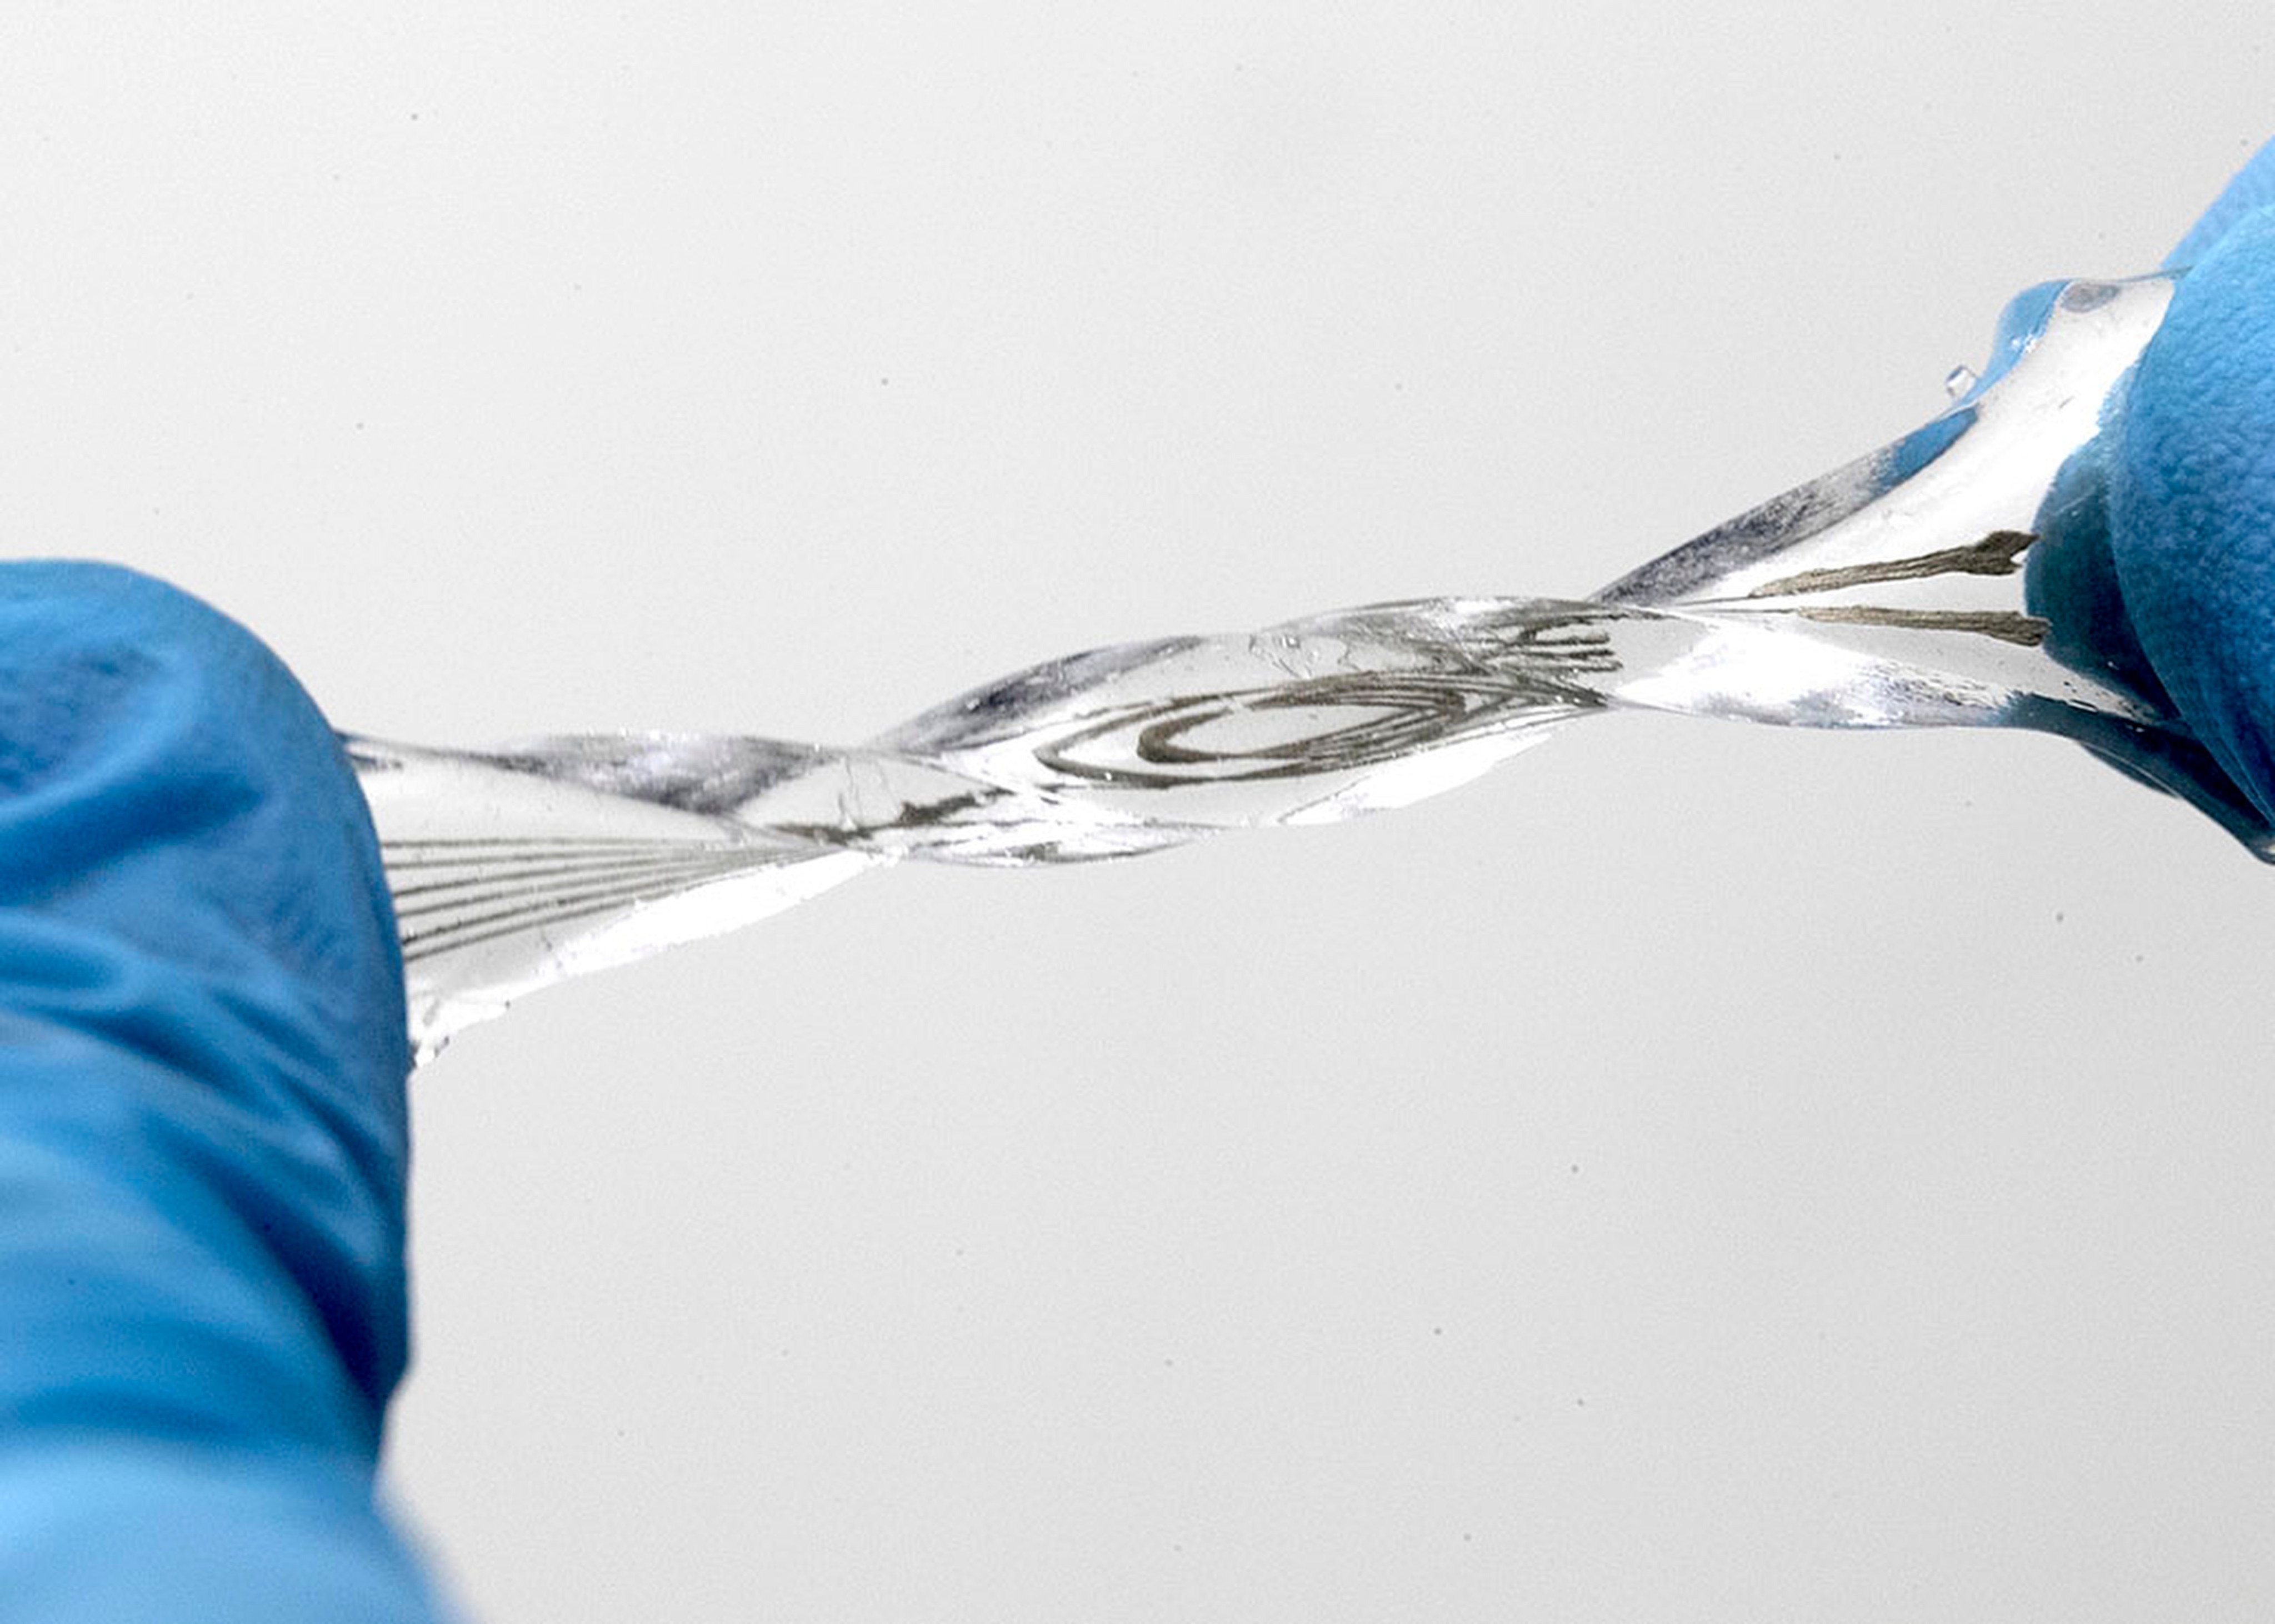 The hydrogel electronic device can be stretched, twisted or compressed and will return to its original shape. Photo: Handout